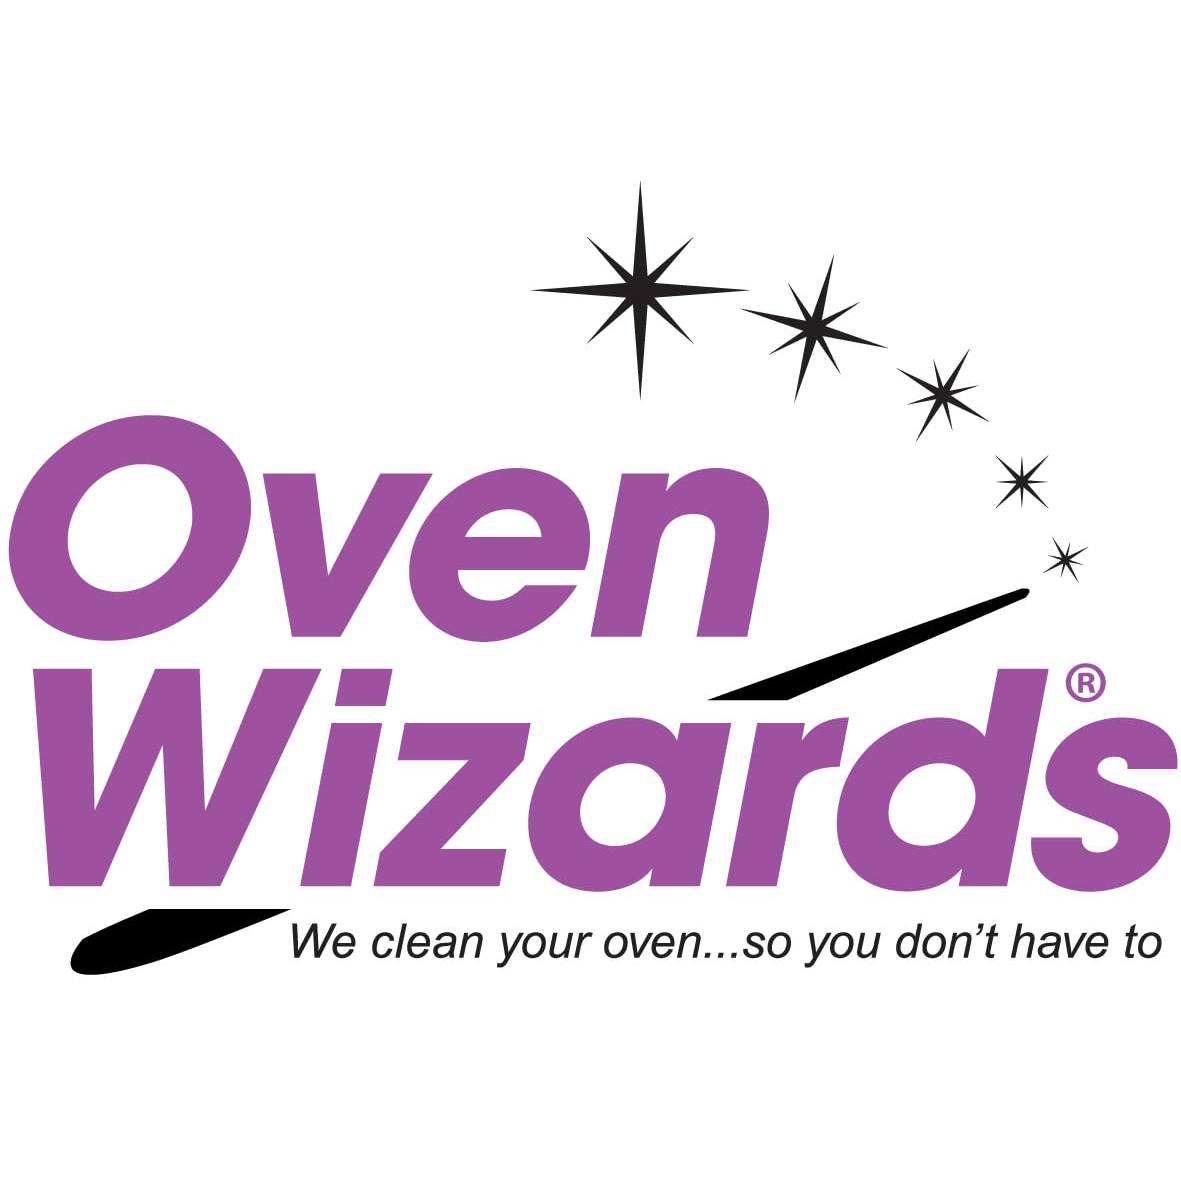 South Staffordshire Oven Wizards Logo